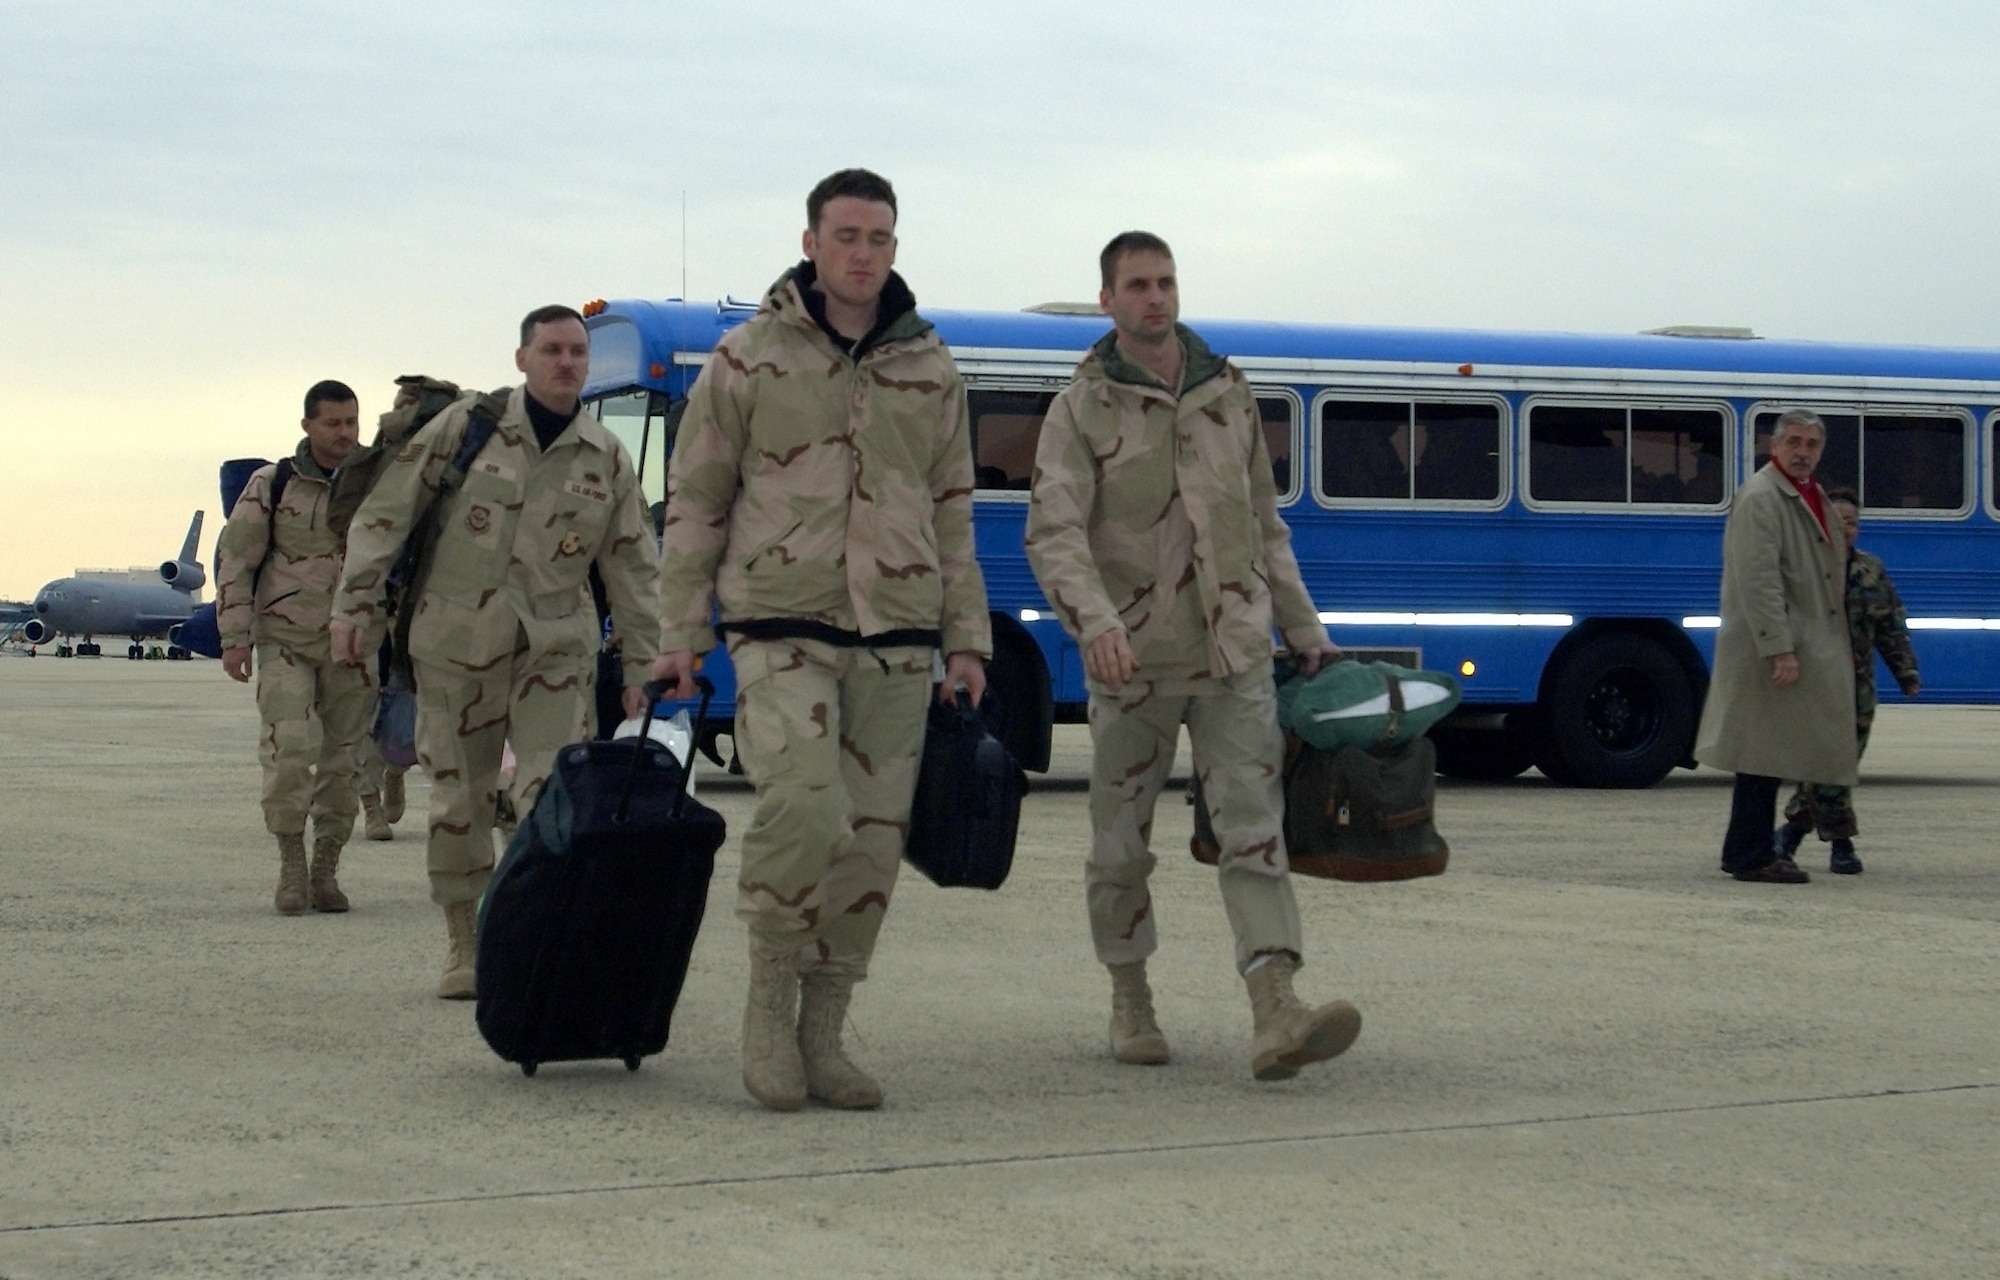 US Air Force (USAF) Airmen from the 621st Air Mobility Operations Group (AMOG), McGuire Air Force Base (AFB), New Jersey (NJ), move from their bus toward an aircraft enroute to a CENTCOM (US Central Command) Area of Responsibility (AOR).